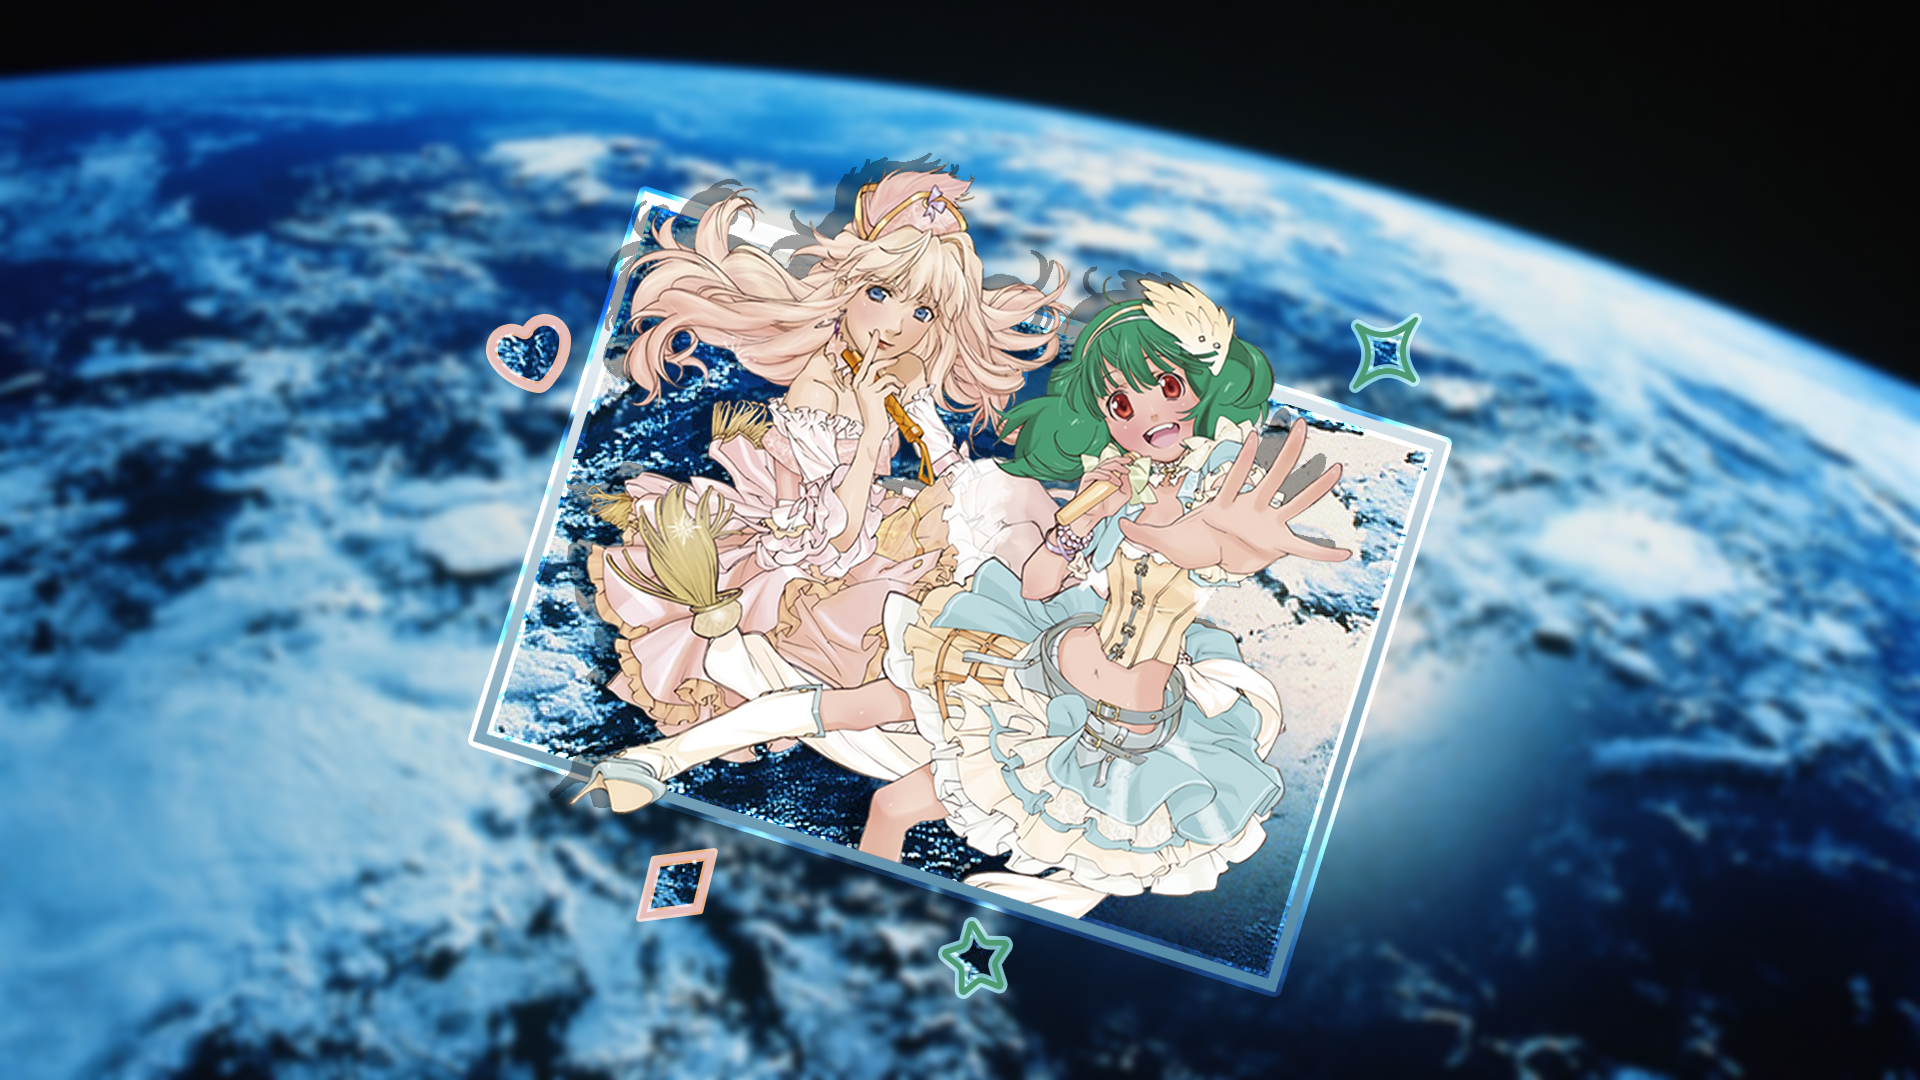 Anime 1920x1080 Macross Frontier Macross Ranka Lee Sheryl Nome anime girls Earth picture-in-picture